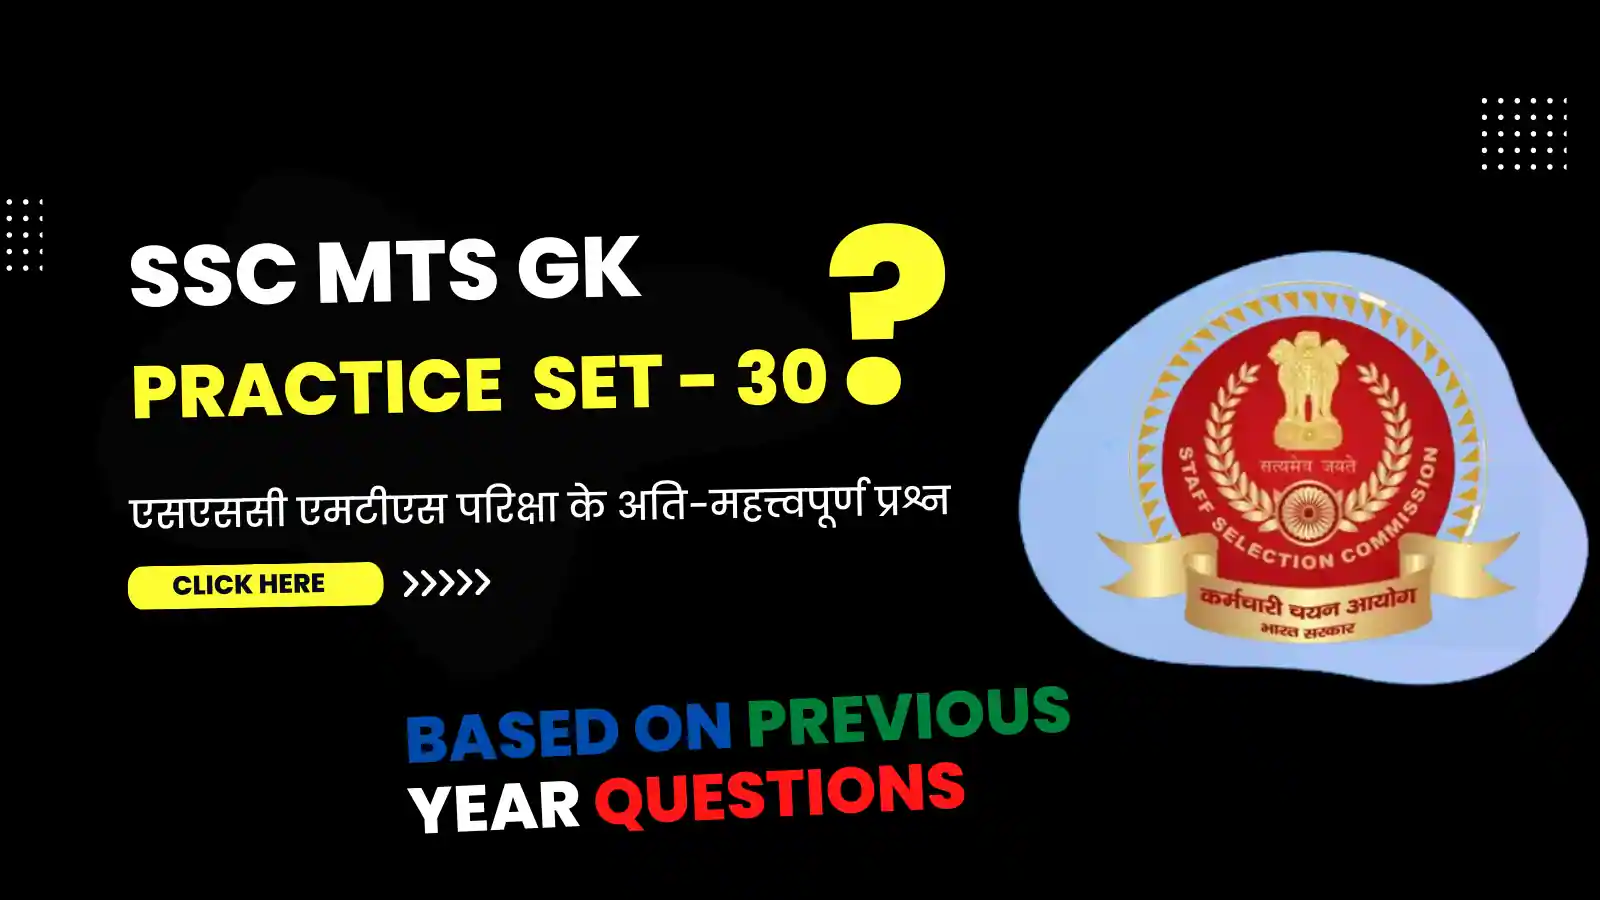 SSC MTS GK Question Practice Set in Hindi - 30